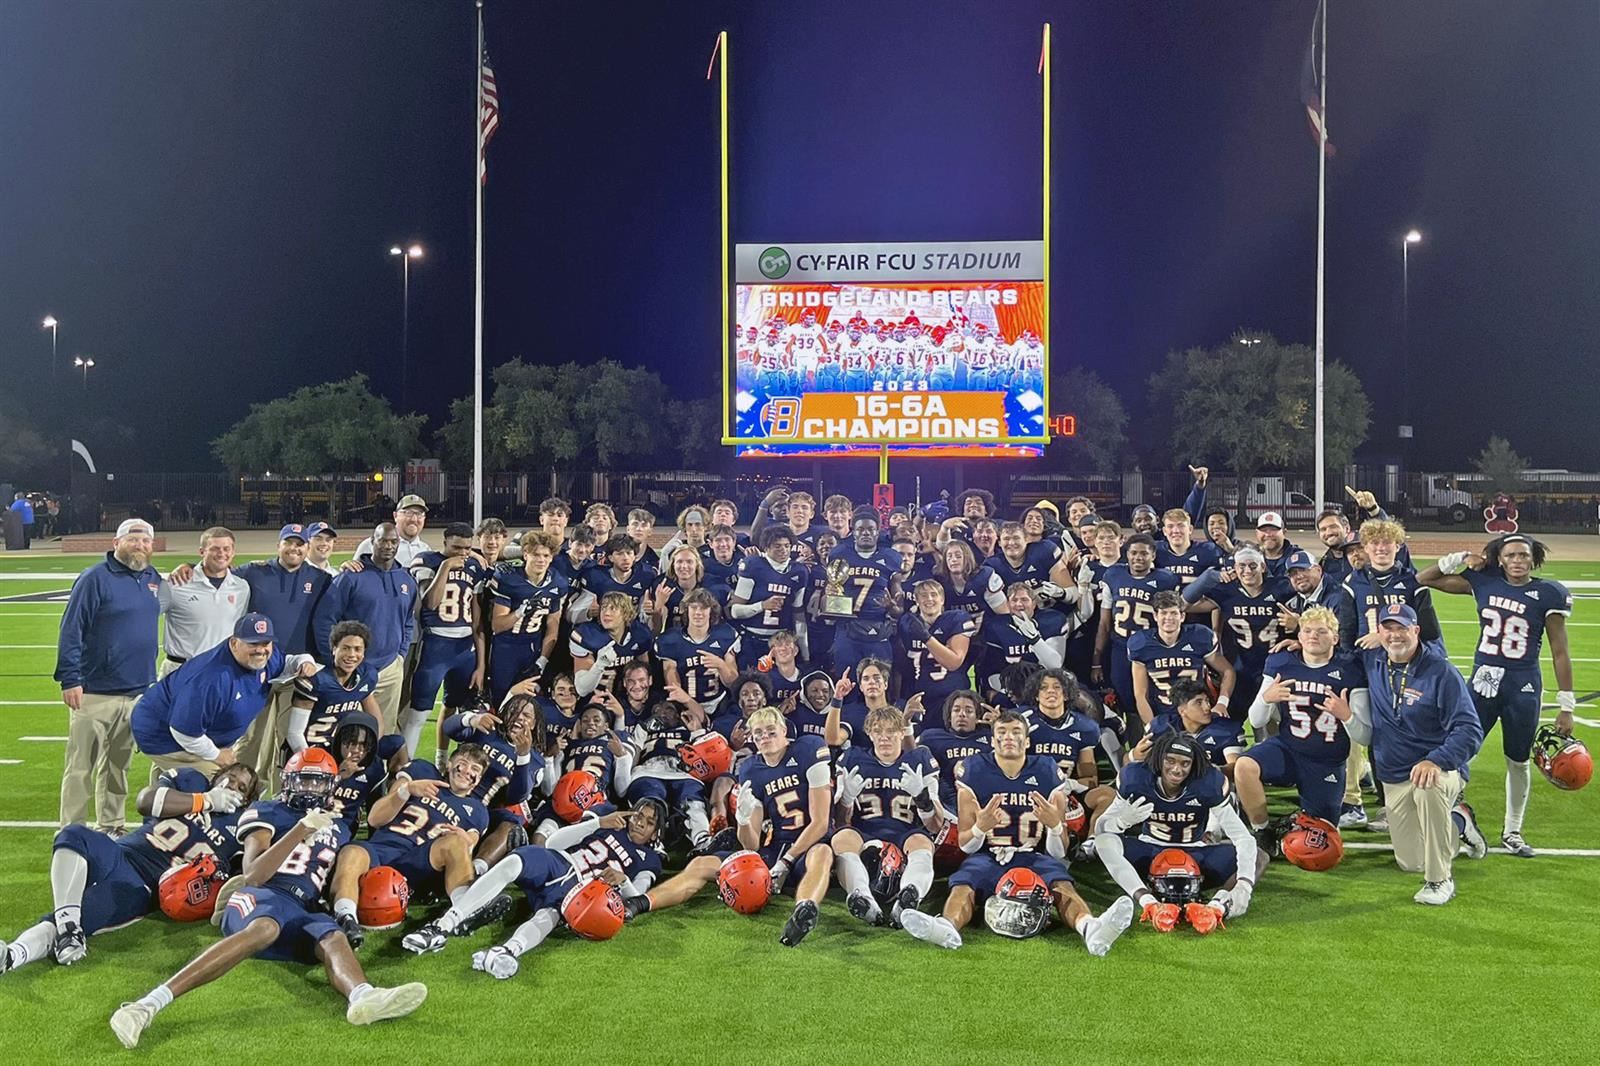 Bridgeland High School finished with an undefeated 7-0 record to win the District 16-6A championship.